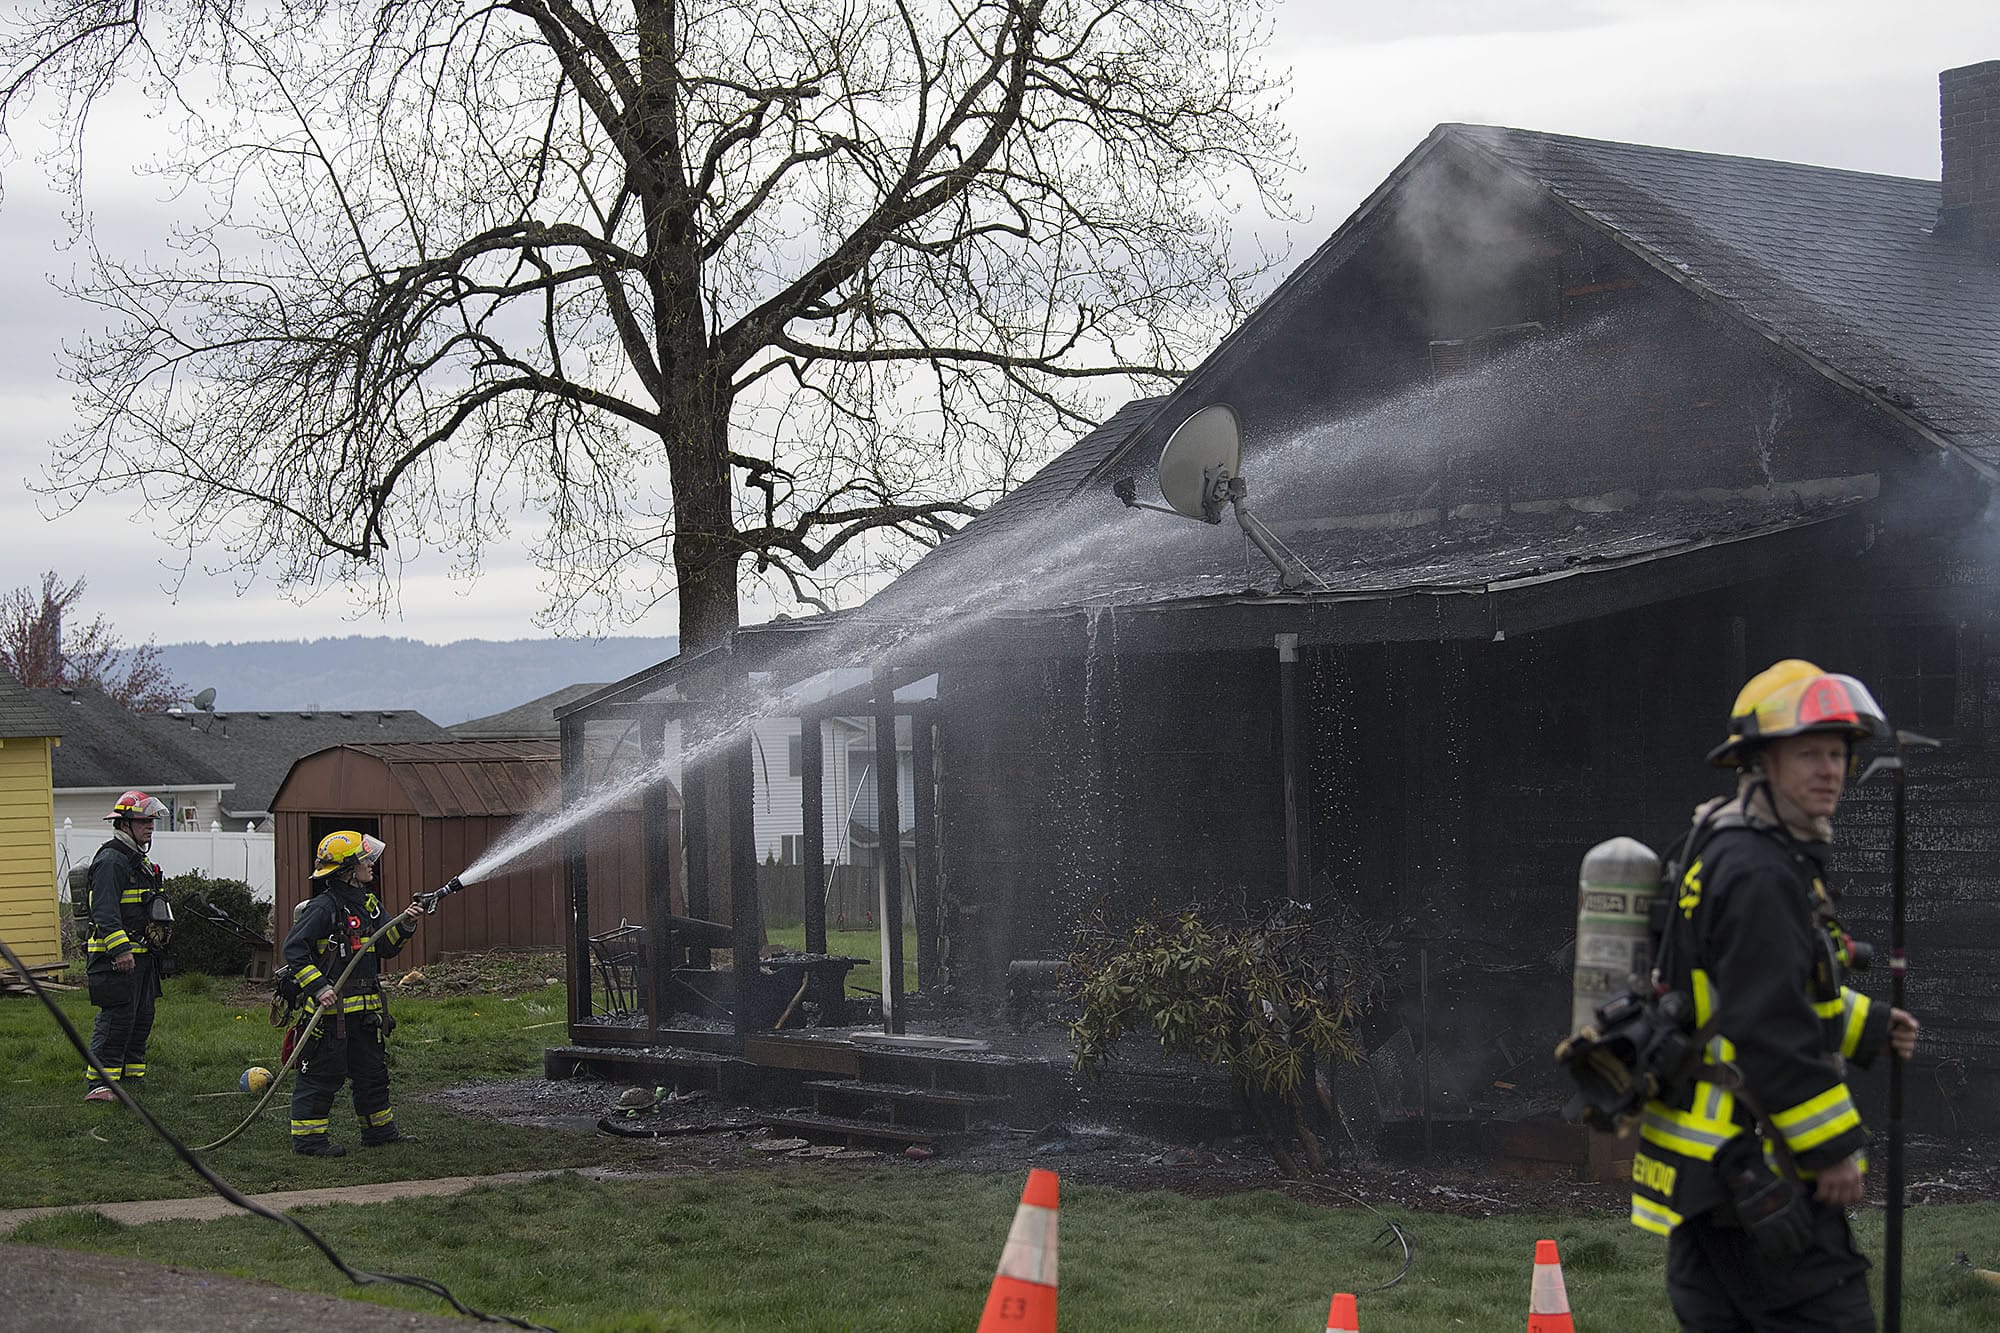 Firefighters work to extinguish a house fire on West 36th Street on Tuesday afternoon, March 28, 2017.